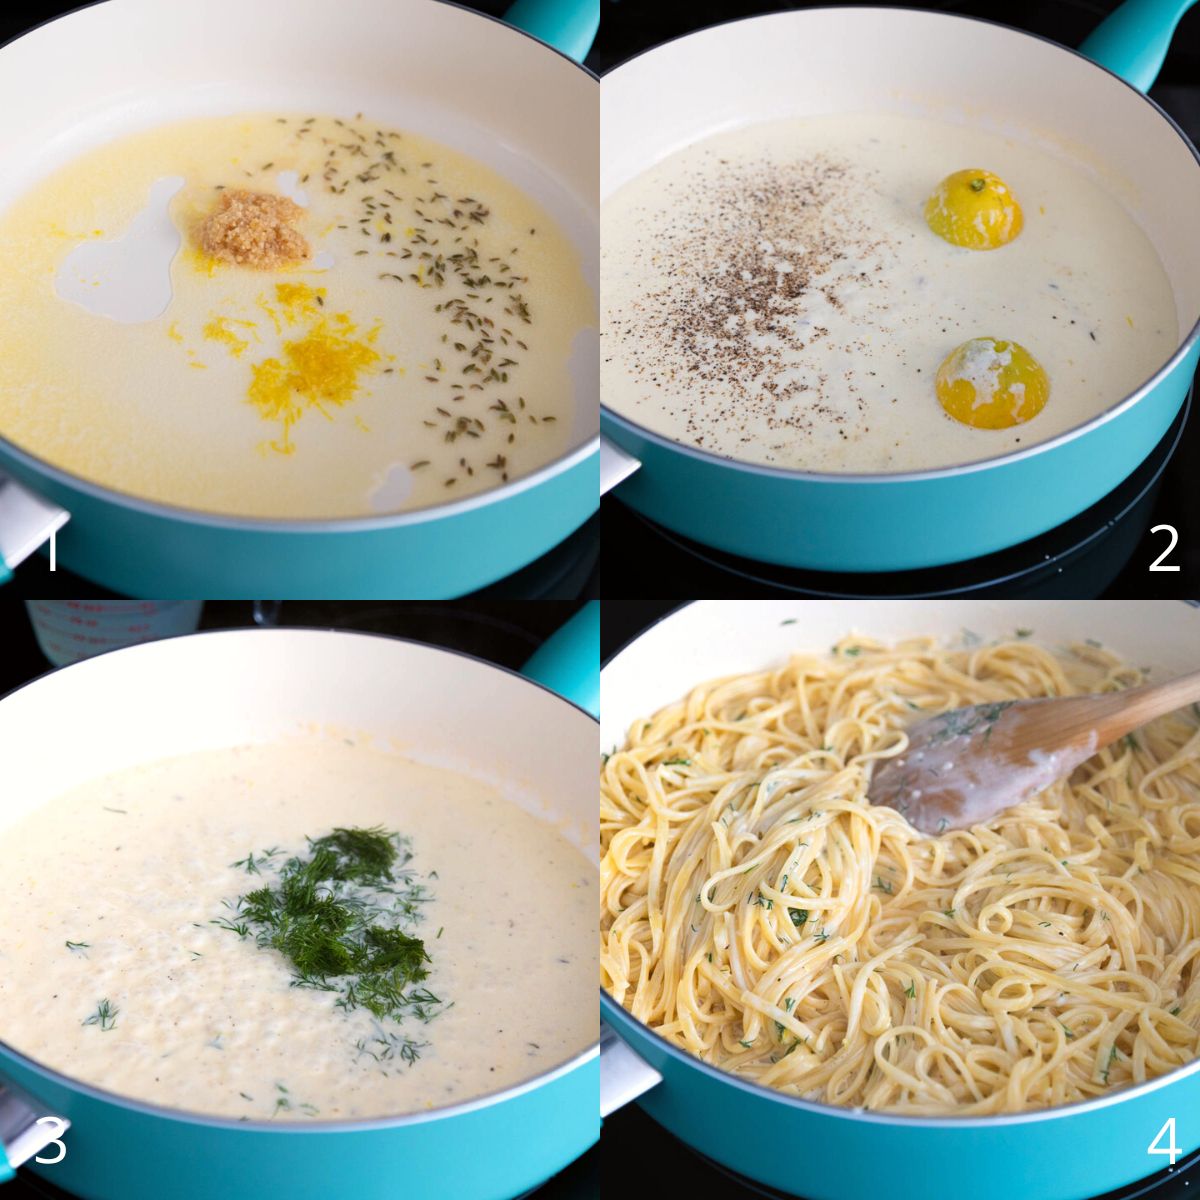 The step by step photos show how to melt the butter and add the lemon zest, add the cream, and season with fresh dill.